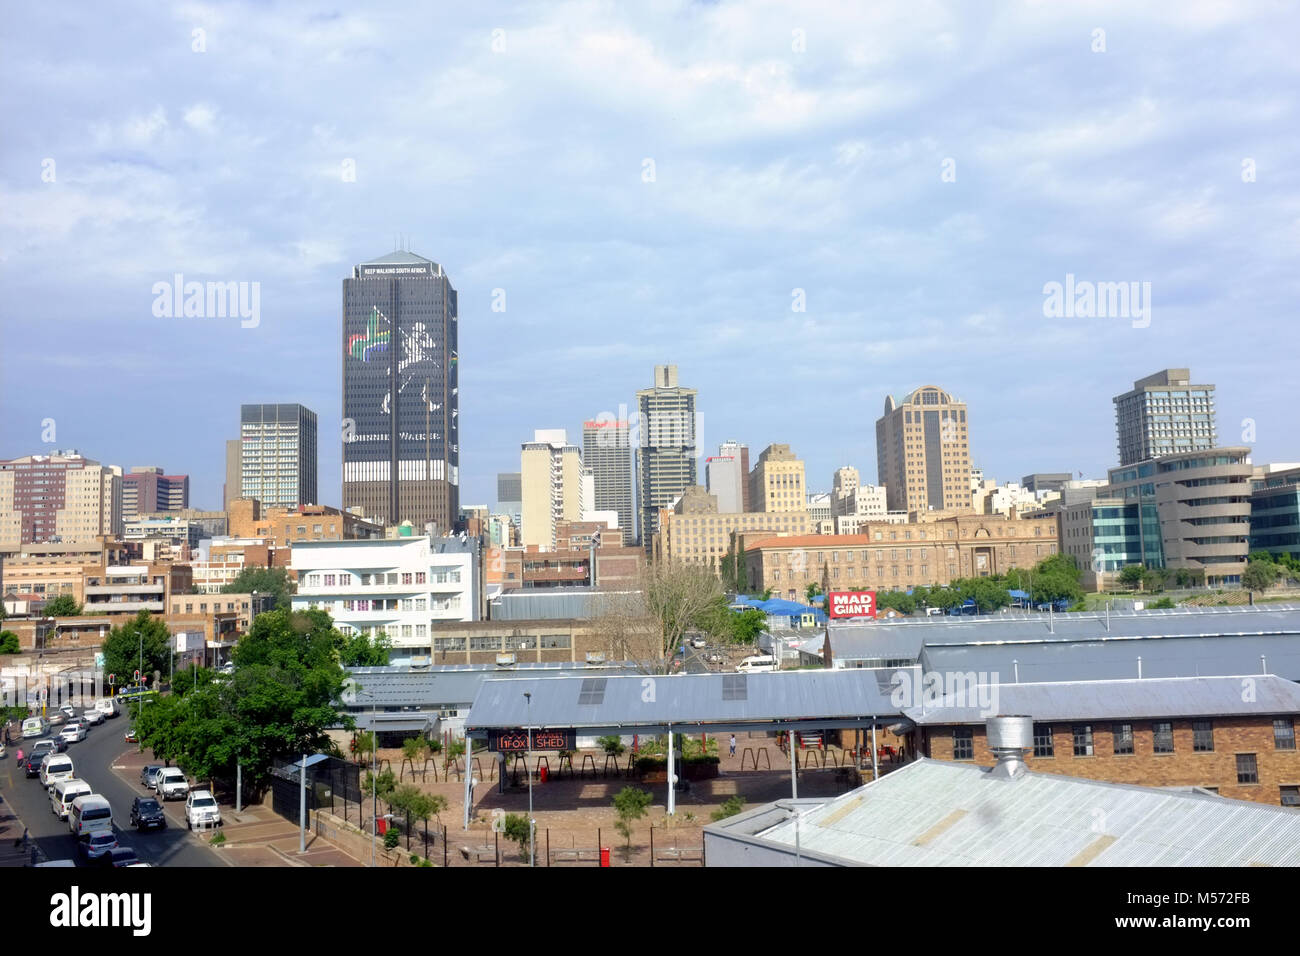 Johannesburg CBD (Central Business District) in South Africa Stock Photo